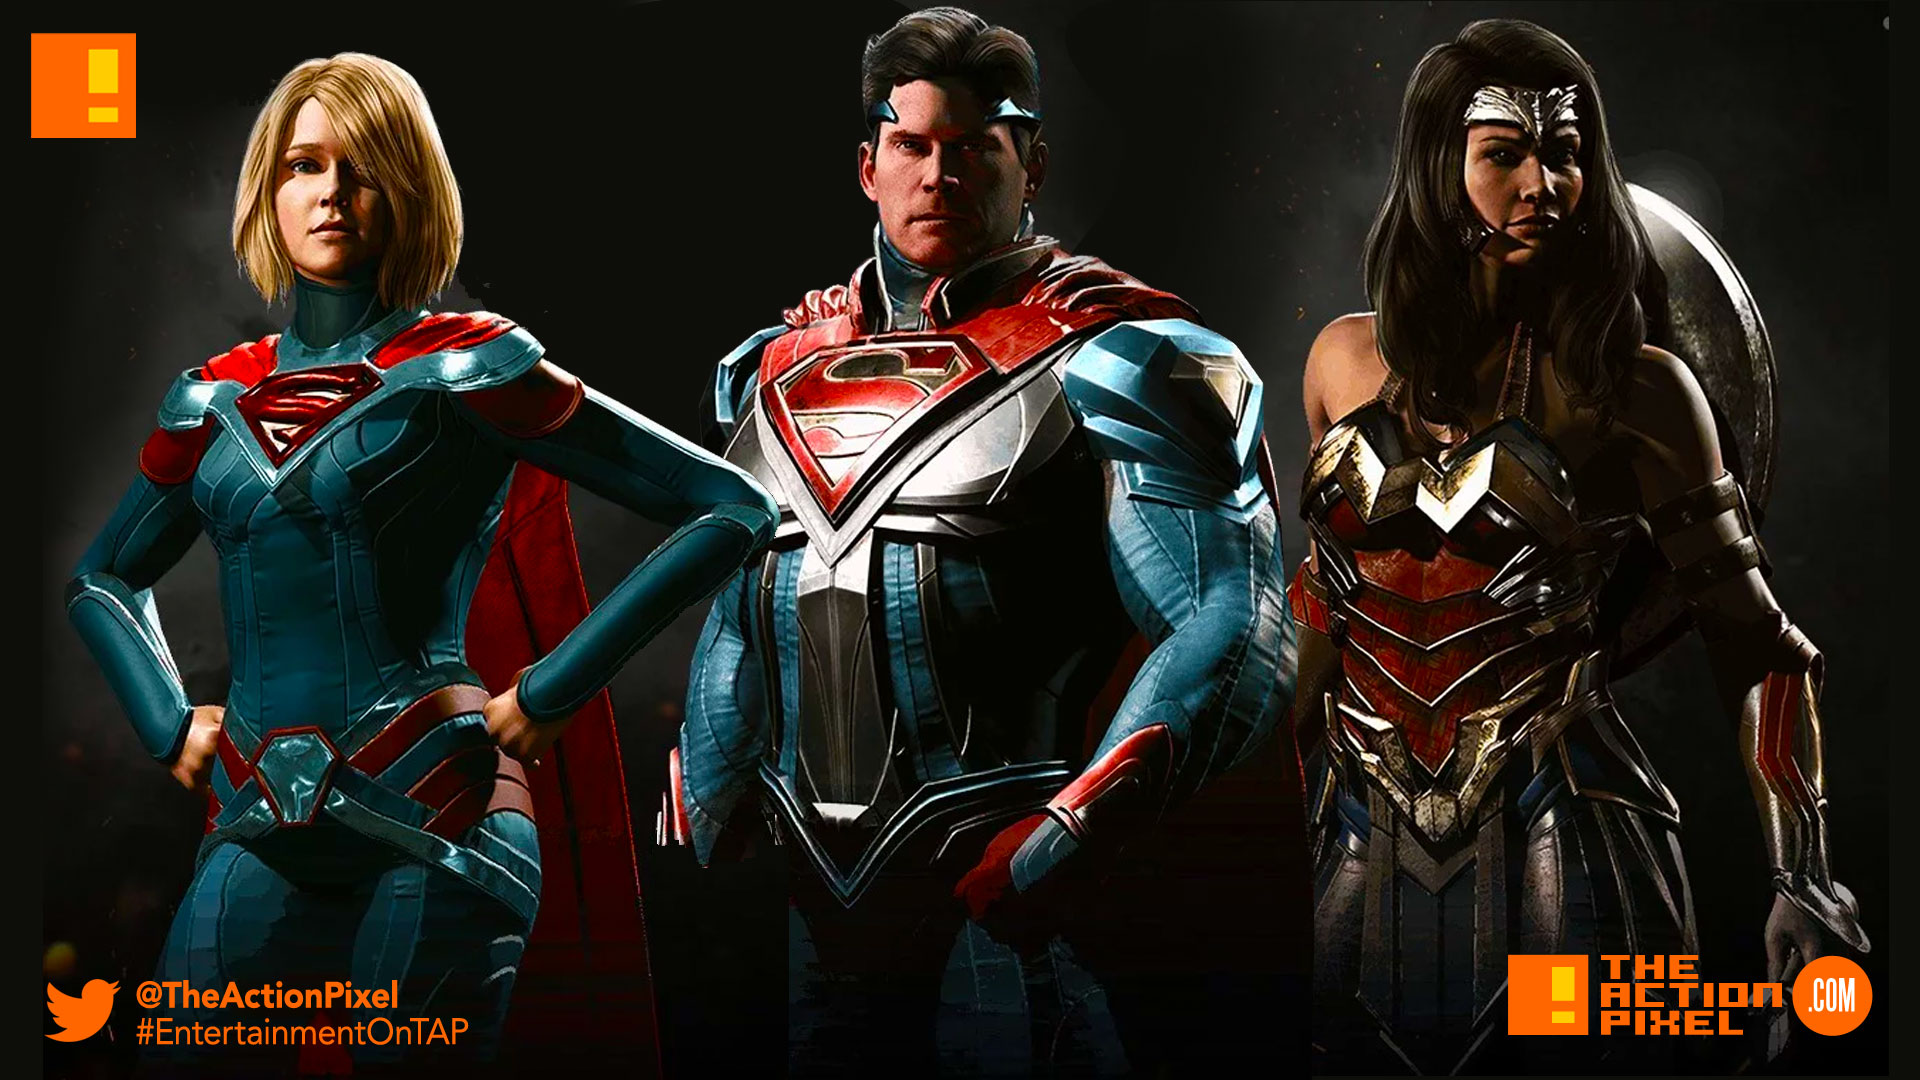 injustice 2, the action pixel entertainment on tap, injustice, dc comics, dc characters, netherrealm studios, wb games,